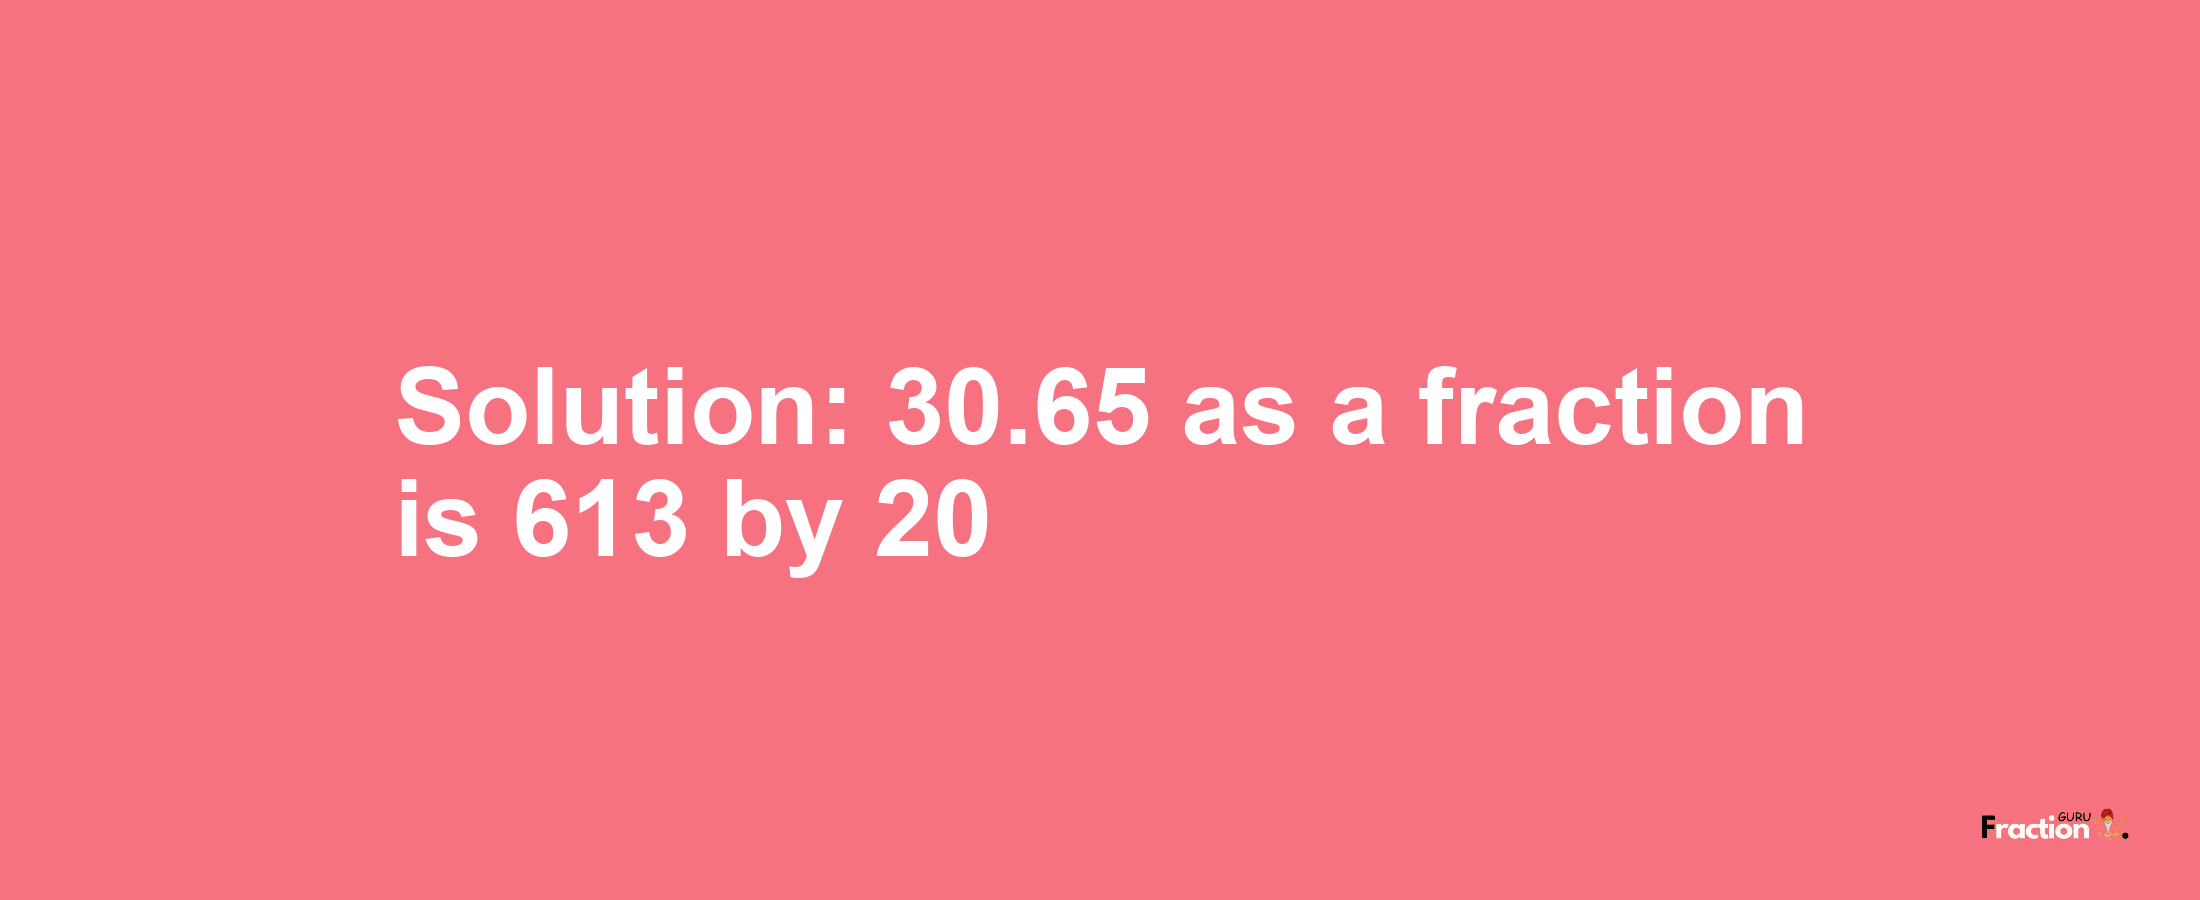 Solution:30.65 as a fraction is 613/20